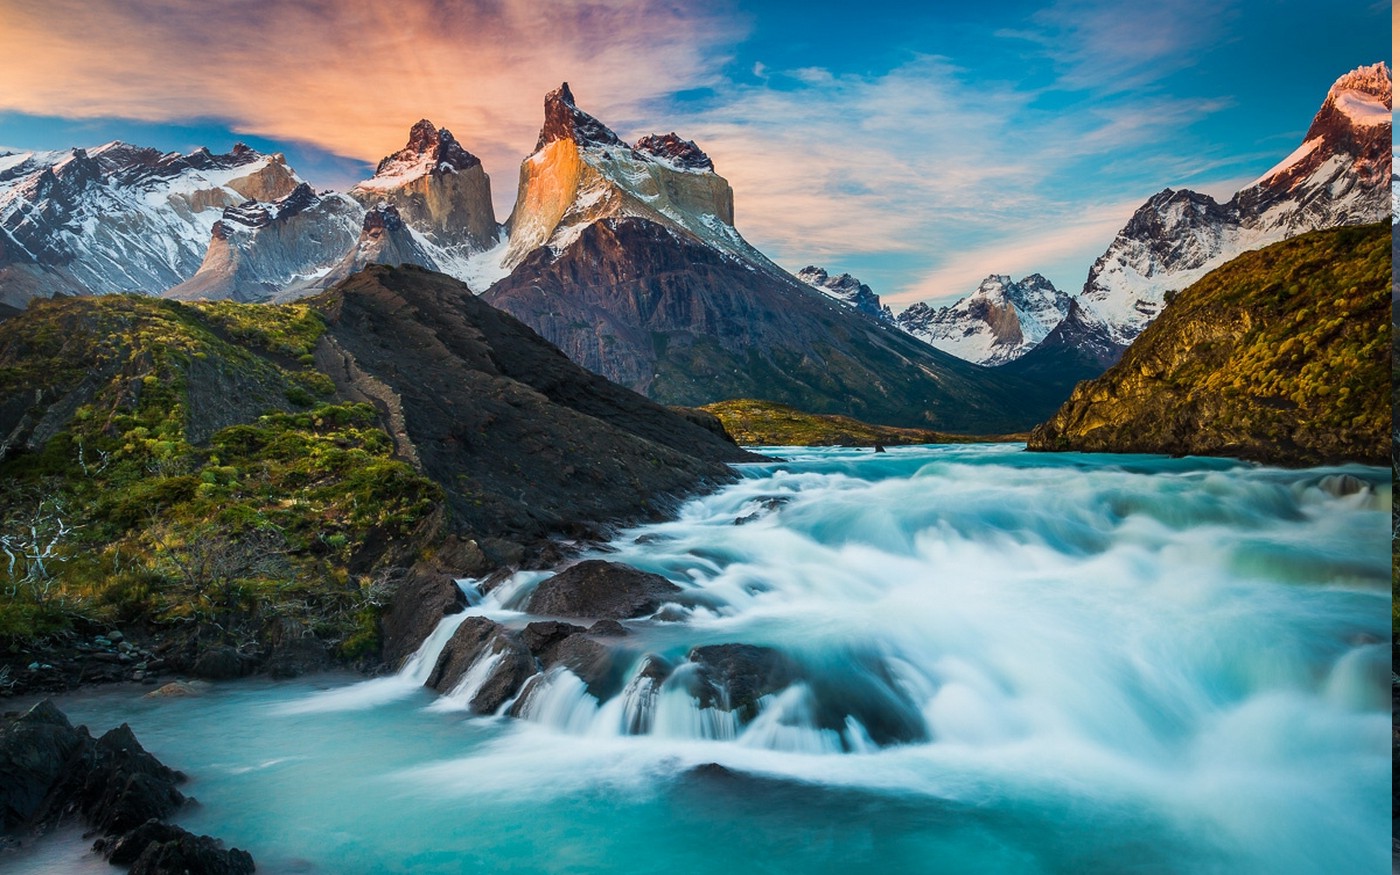 nature, Landscape, Torres Del Paine, Horns, Fall, Chile, Waterfall, Sunrise, Mountain, Snowy Peak, Long Exposure, Turquoise, Water, River Wallpaper